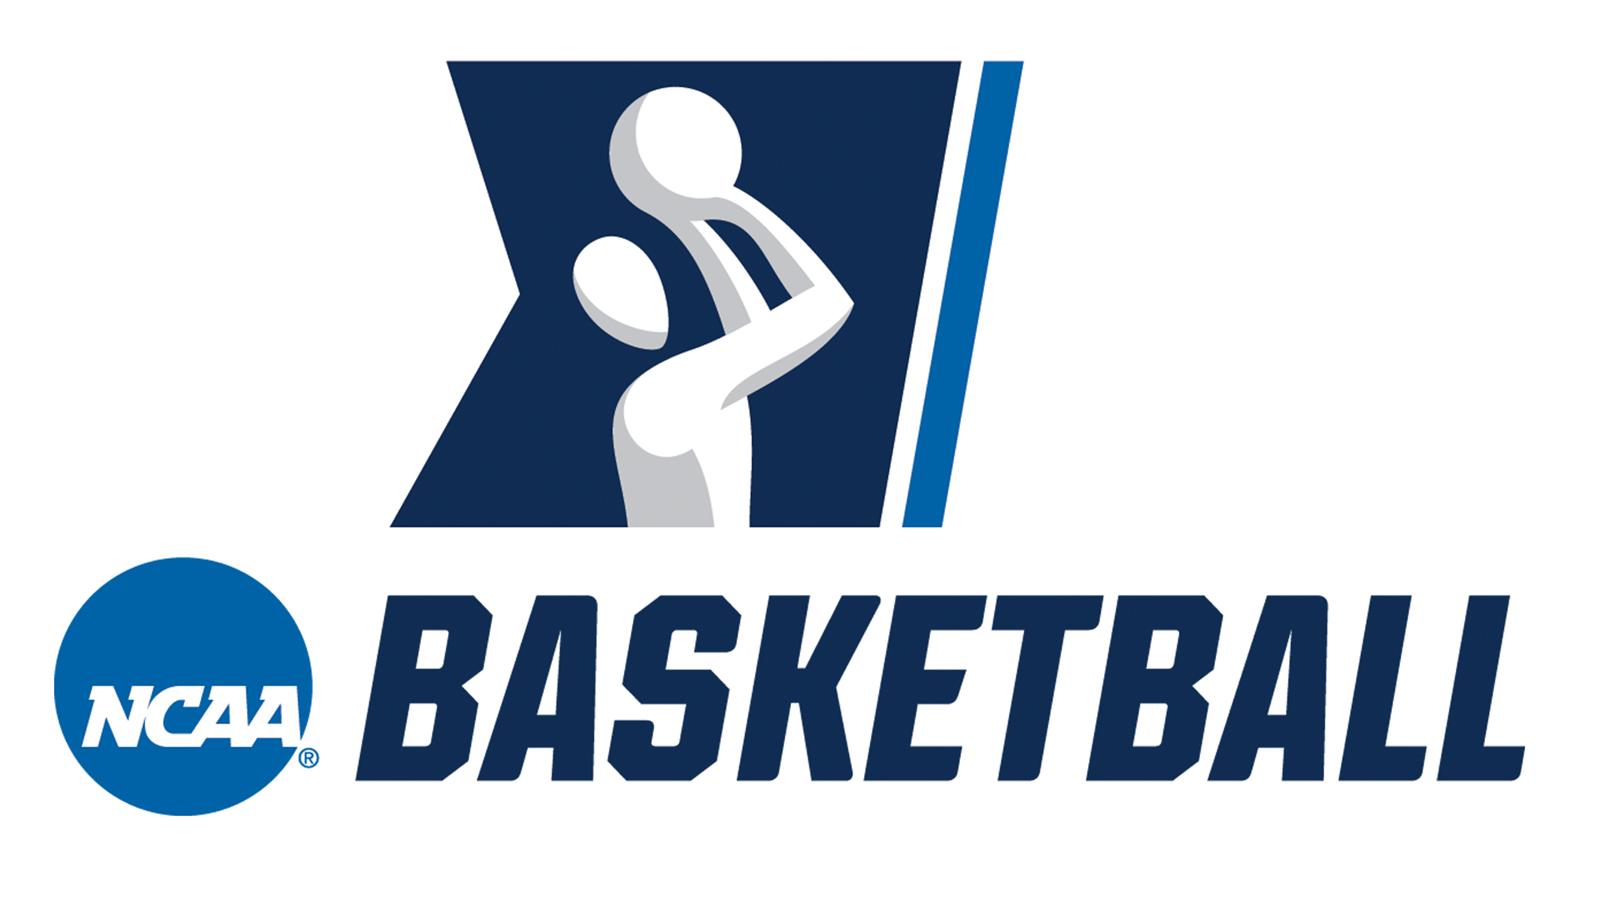 NCAA Men's Basketball Tournament: East Regional - All Sessions at Madison Square Garden